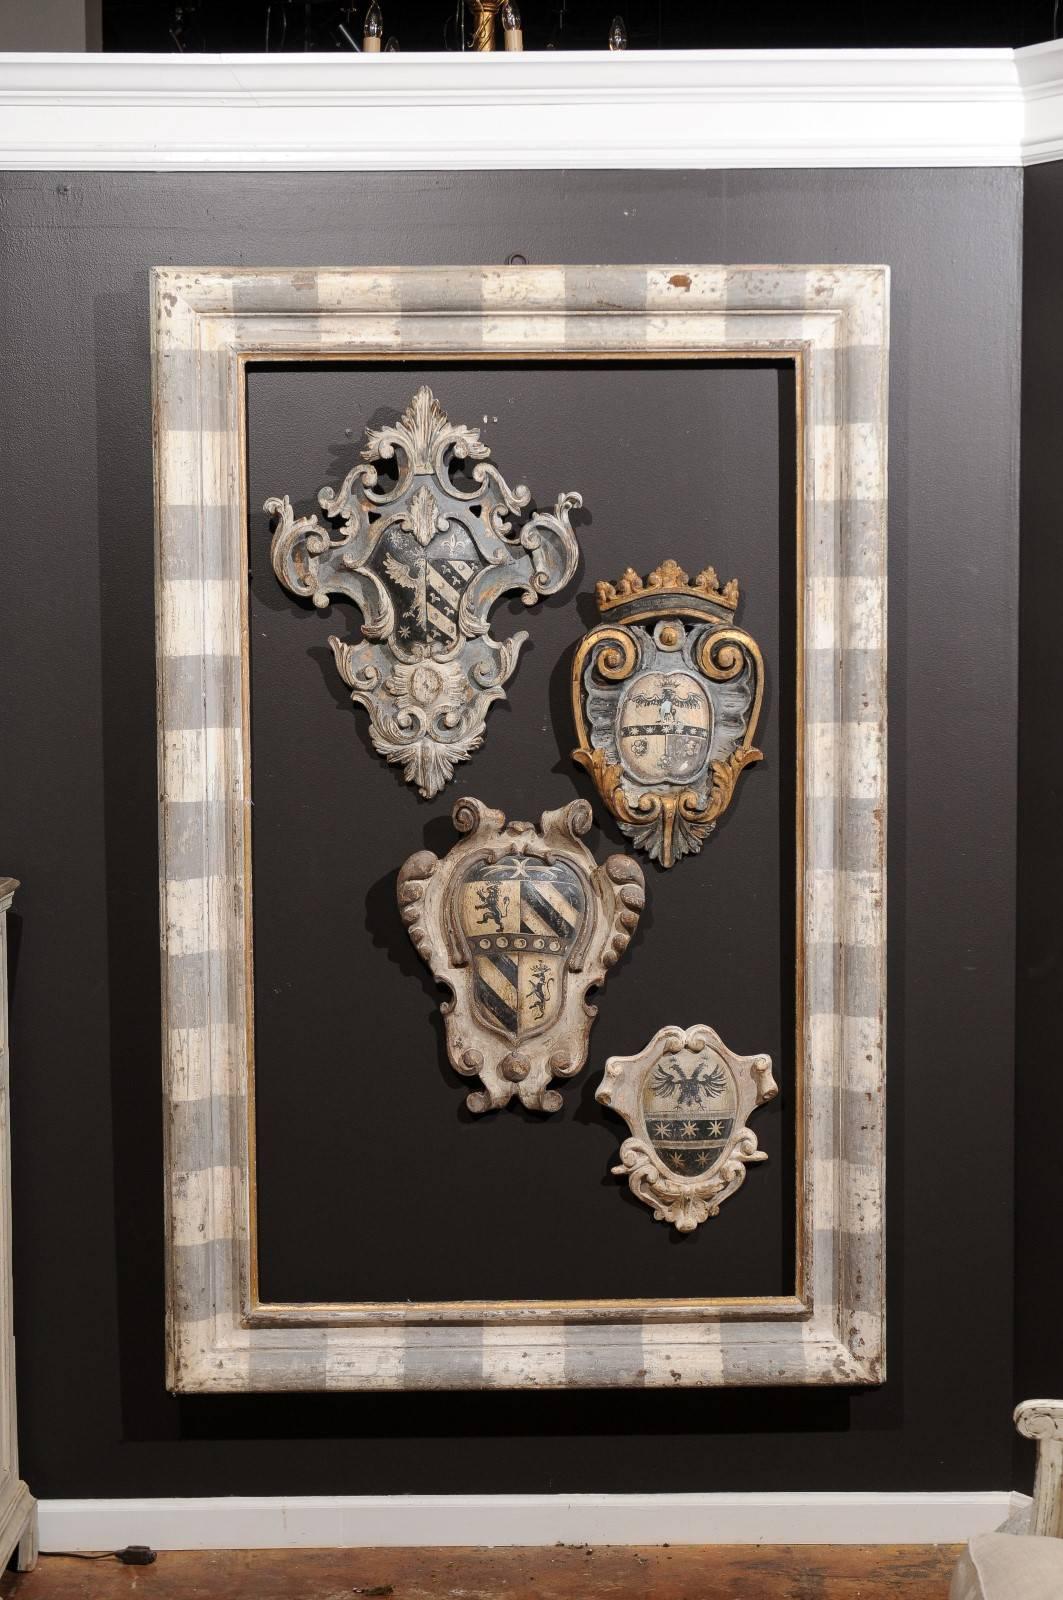 A large-scale Italian made rectangular painted wooden frame from the 19th century. This frame features a simple rectangular silhouette, painted in alternating patterns of light grey and off-white stripes adorning the two outer layers, while a thin